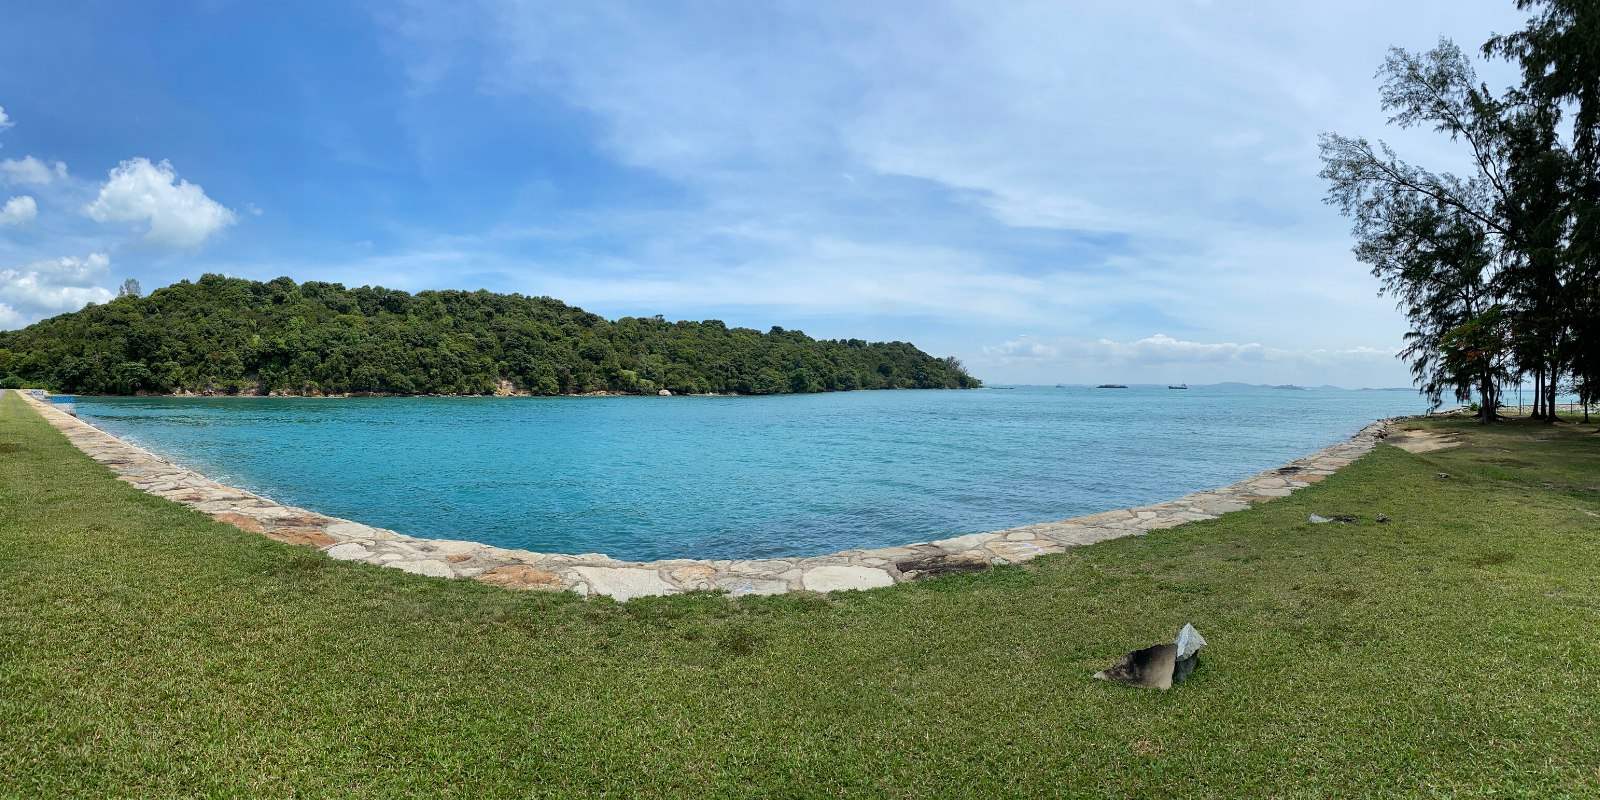 Discovering Singapore's Rich Marine Ecosystems: The Latest St John's Island Study Tour